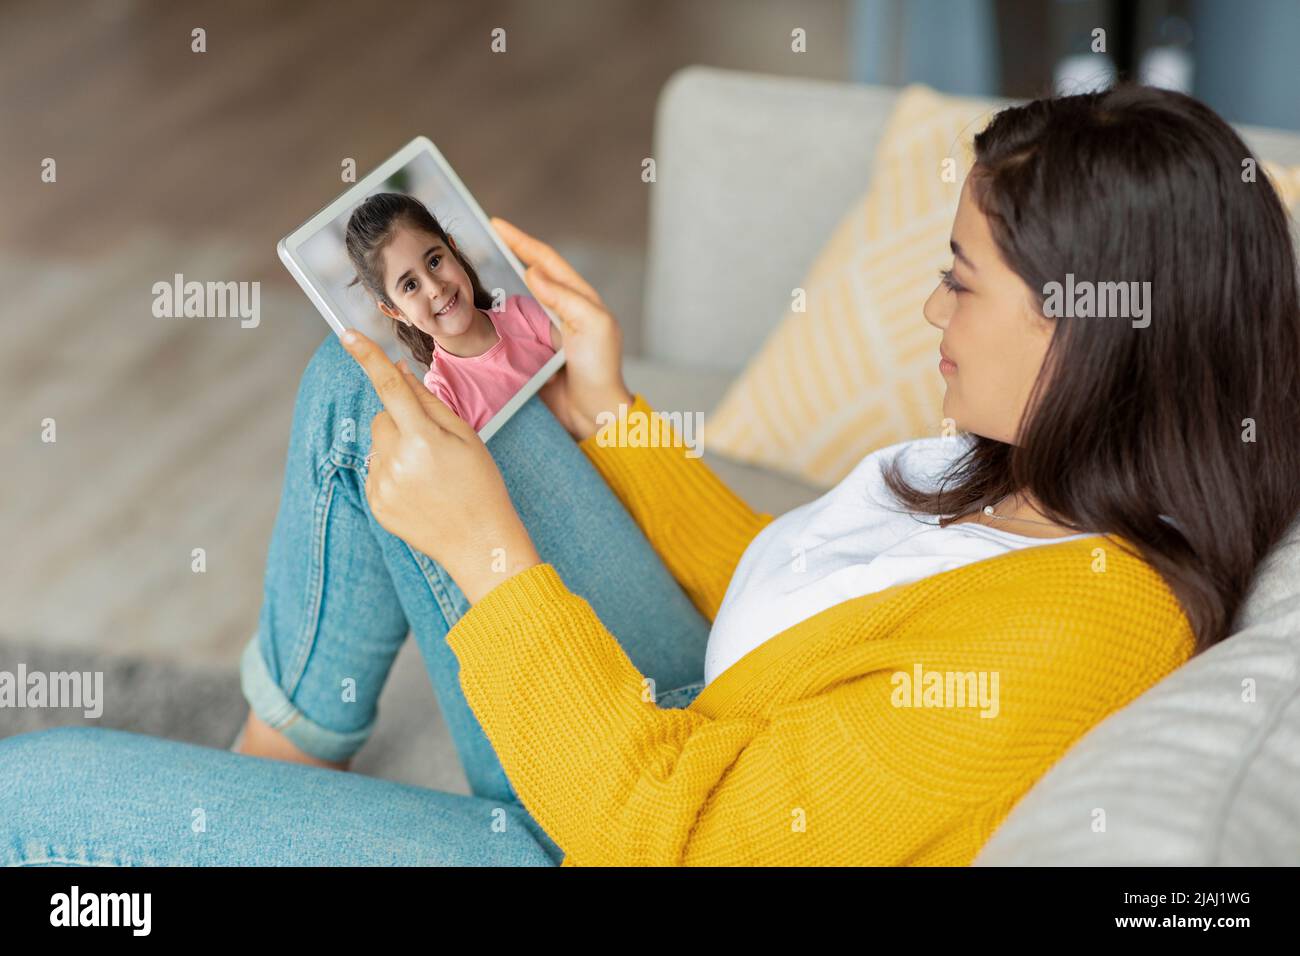 Relaxed middle eastern woman sitting on couch, using tablet Stock Photo